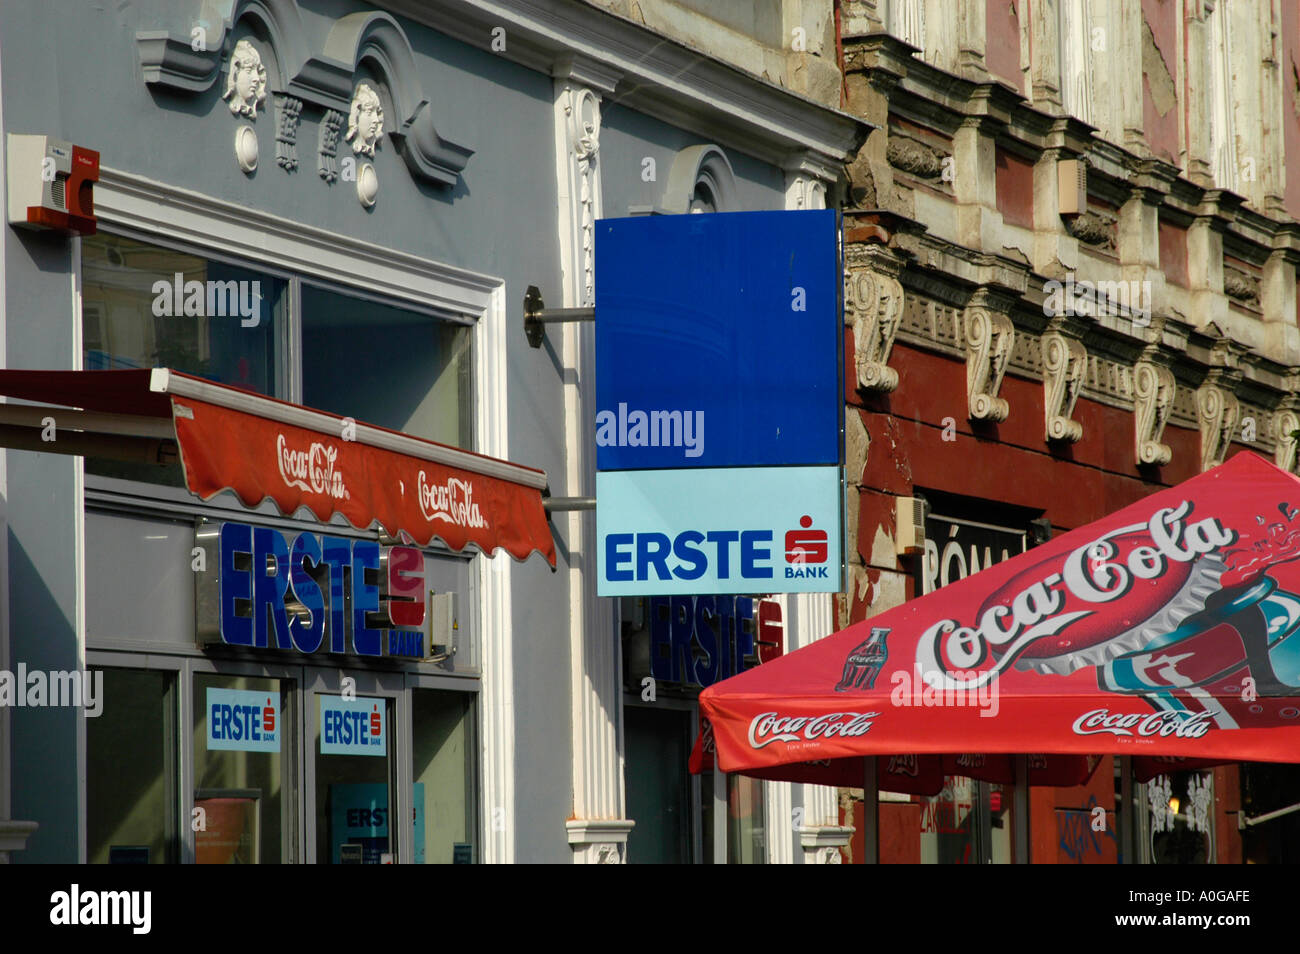 Erste Bank, Coca Cola in Hungary Stock Photo